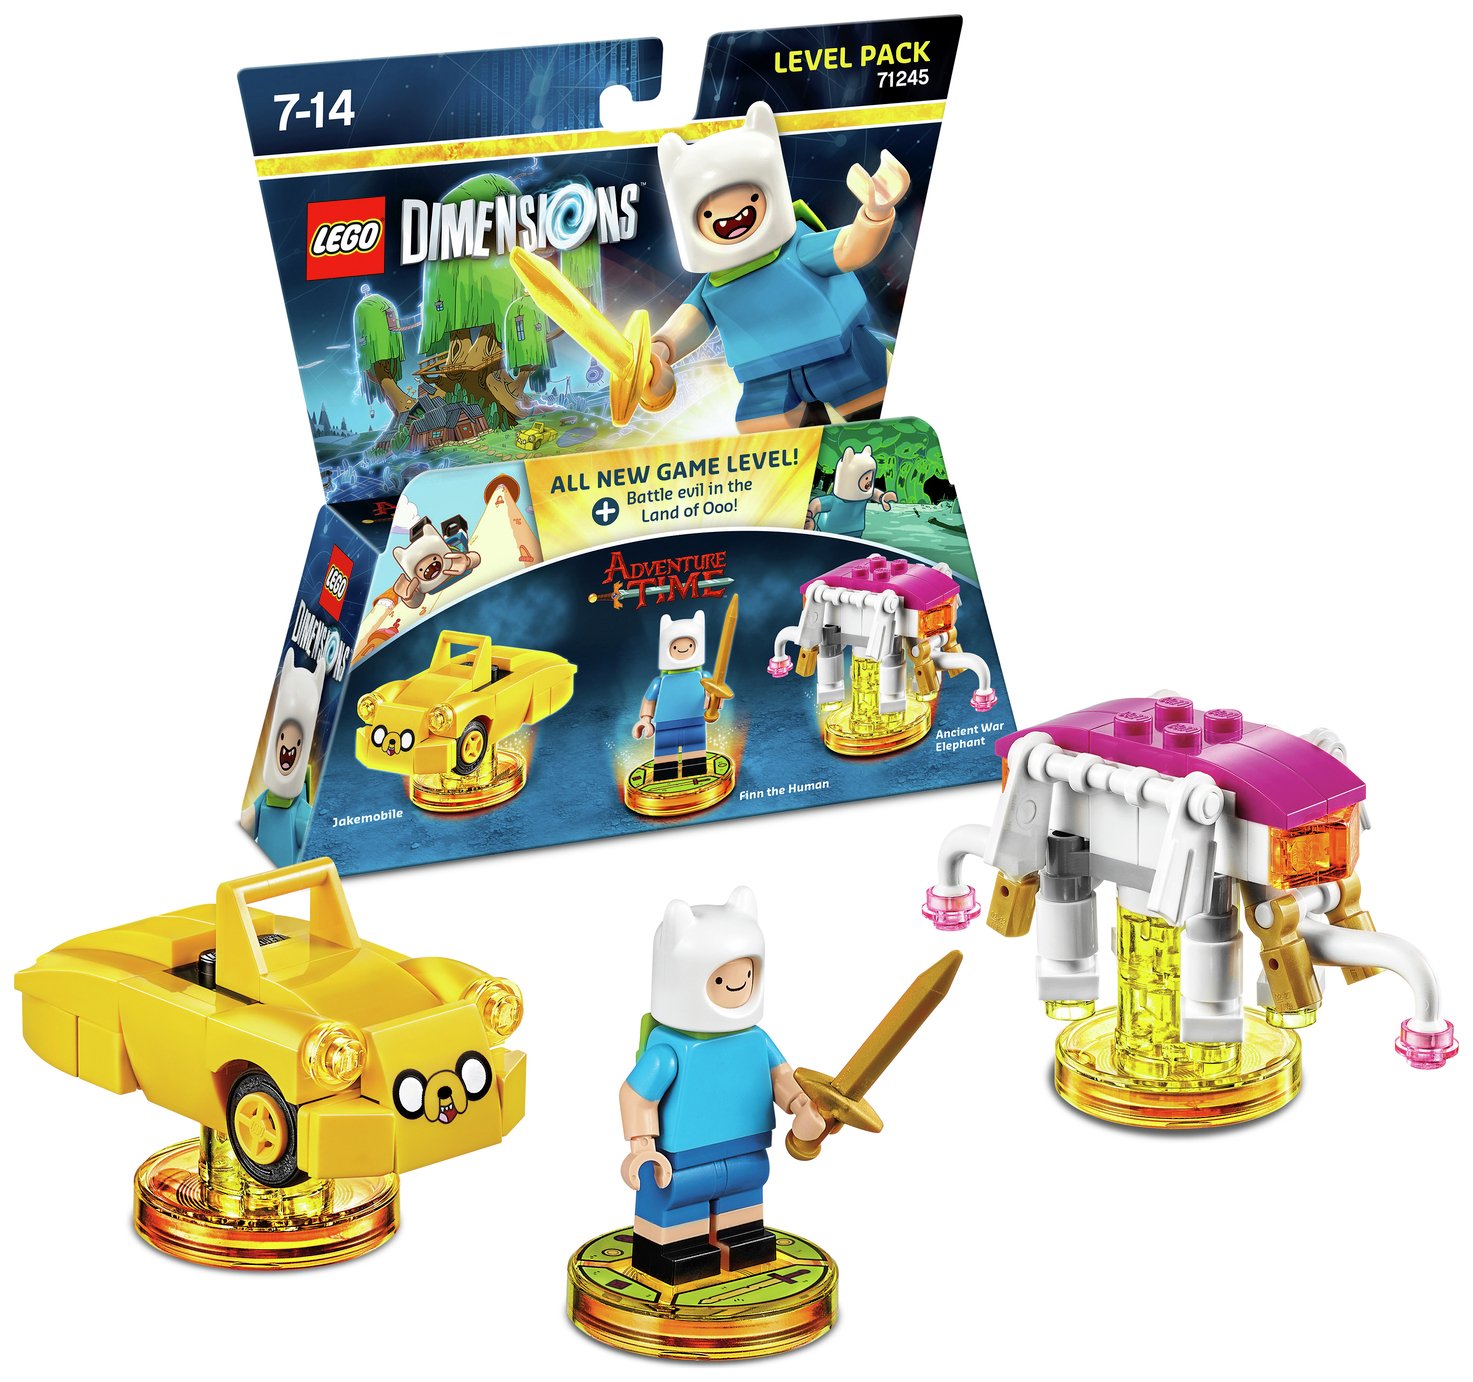 LEGO Dimensions Adventure Time Level Pack Game